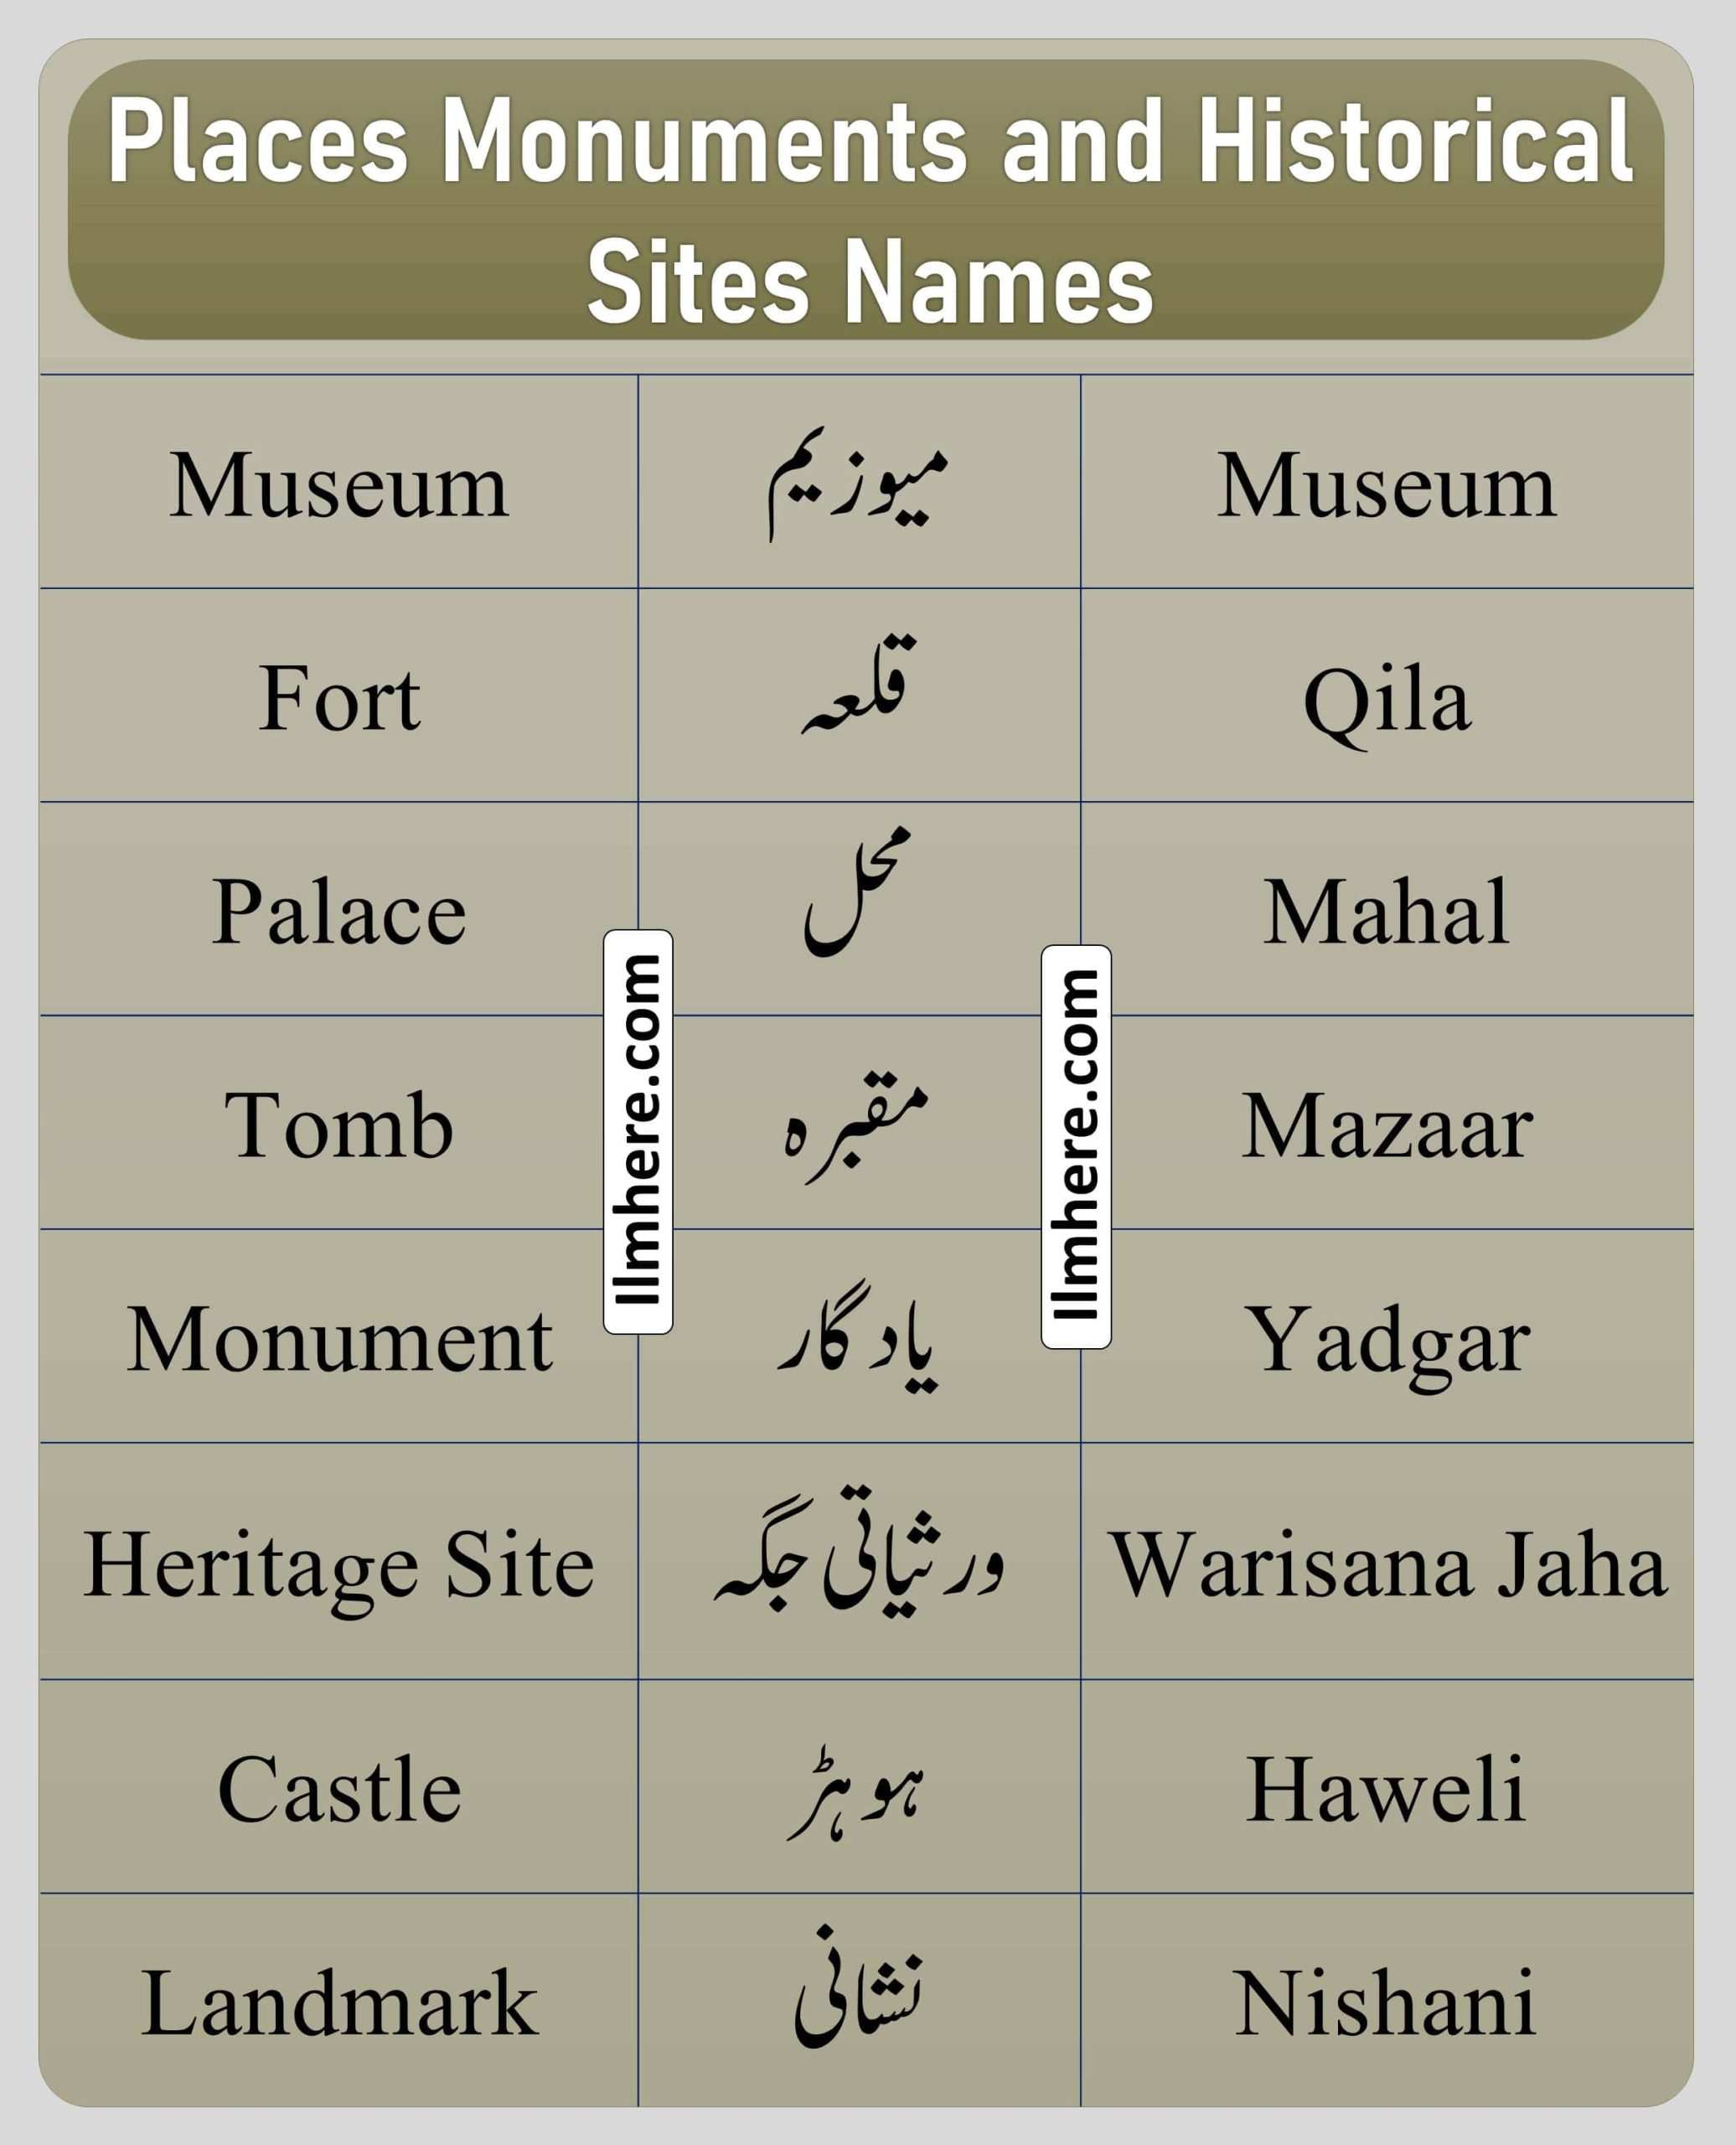 Places Monuments and Historical Sites Names